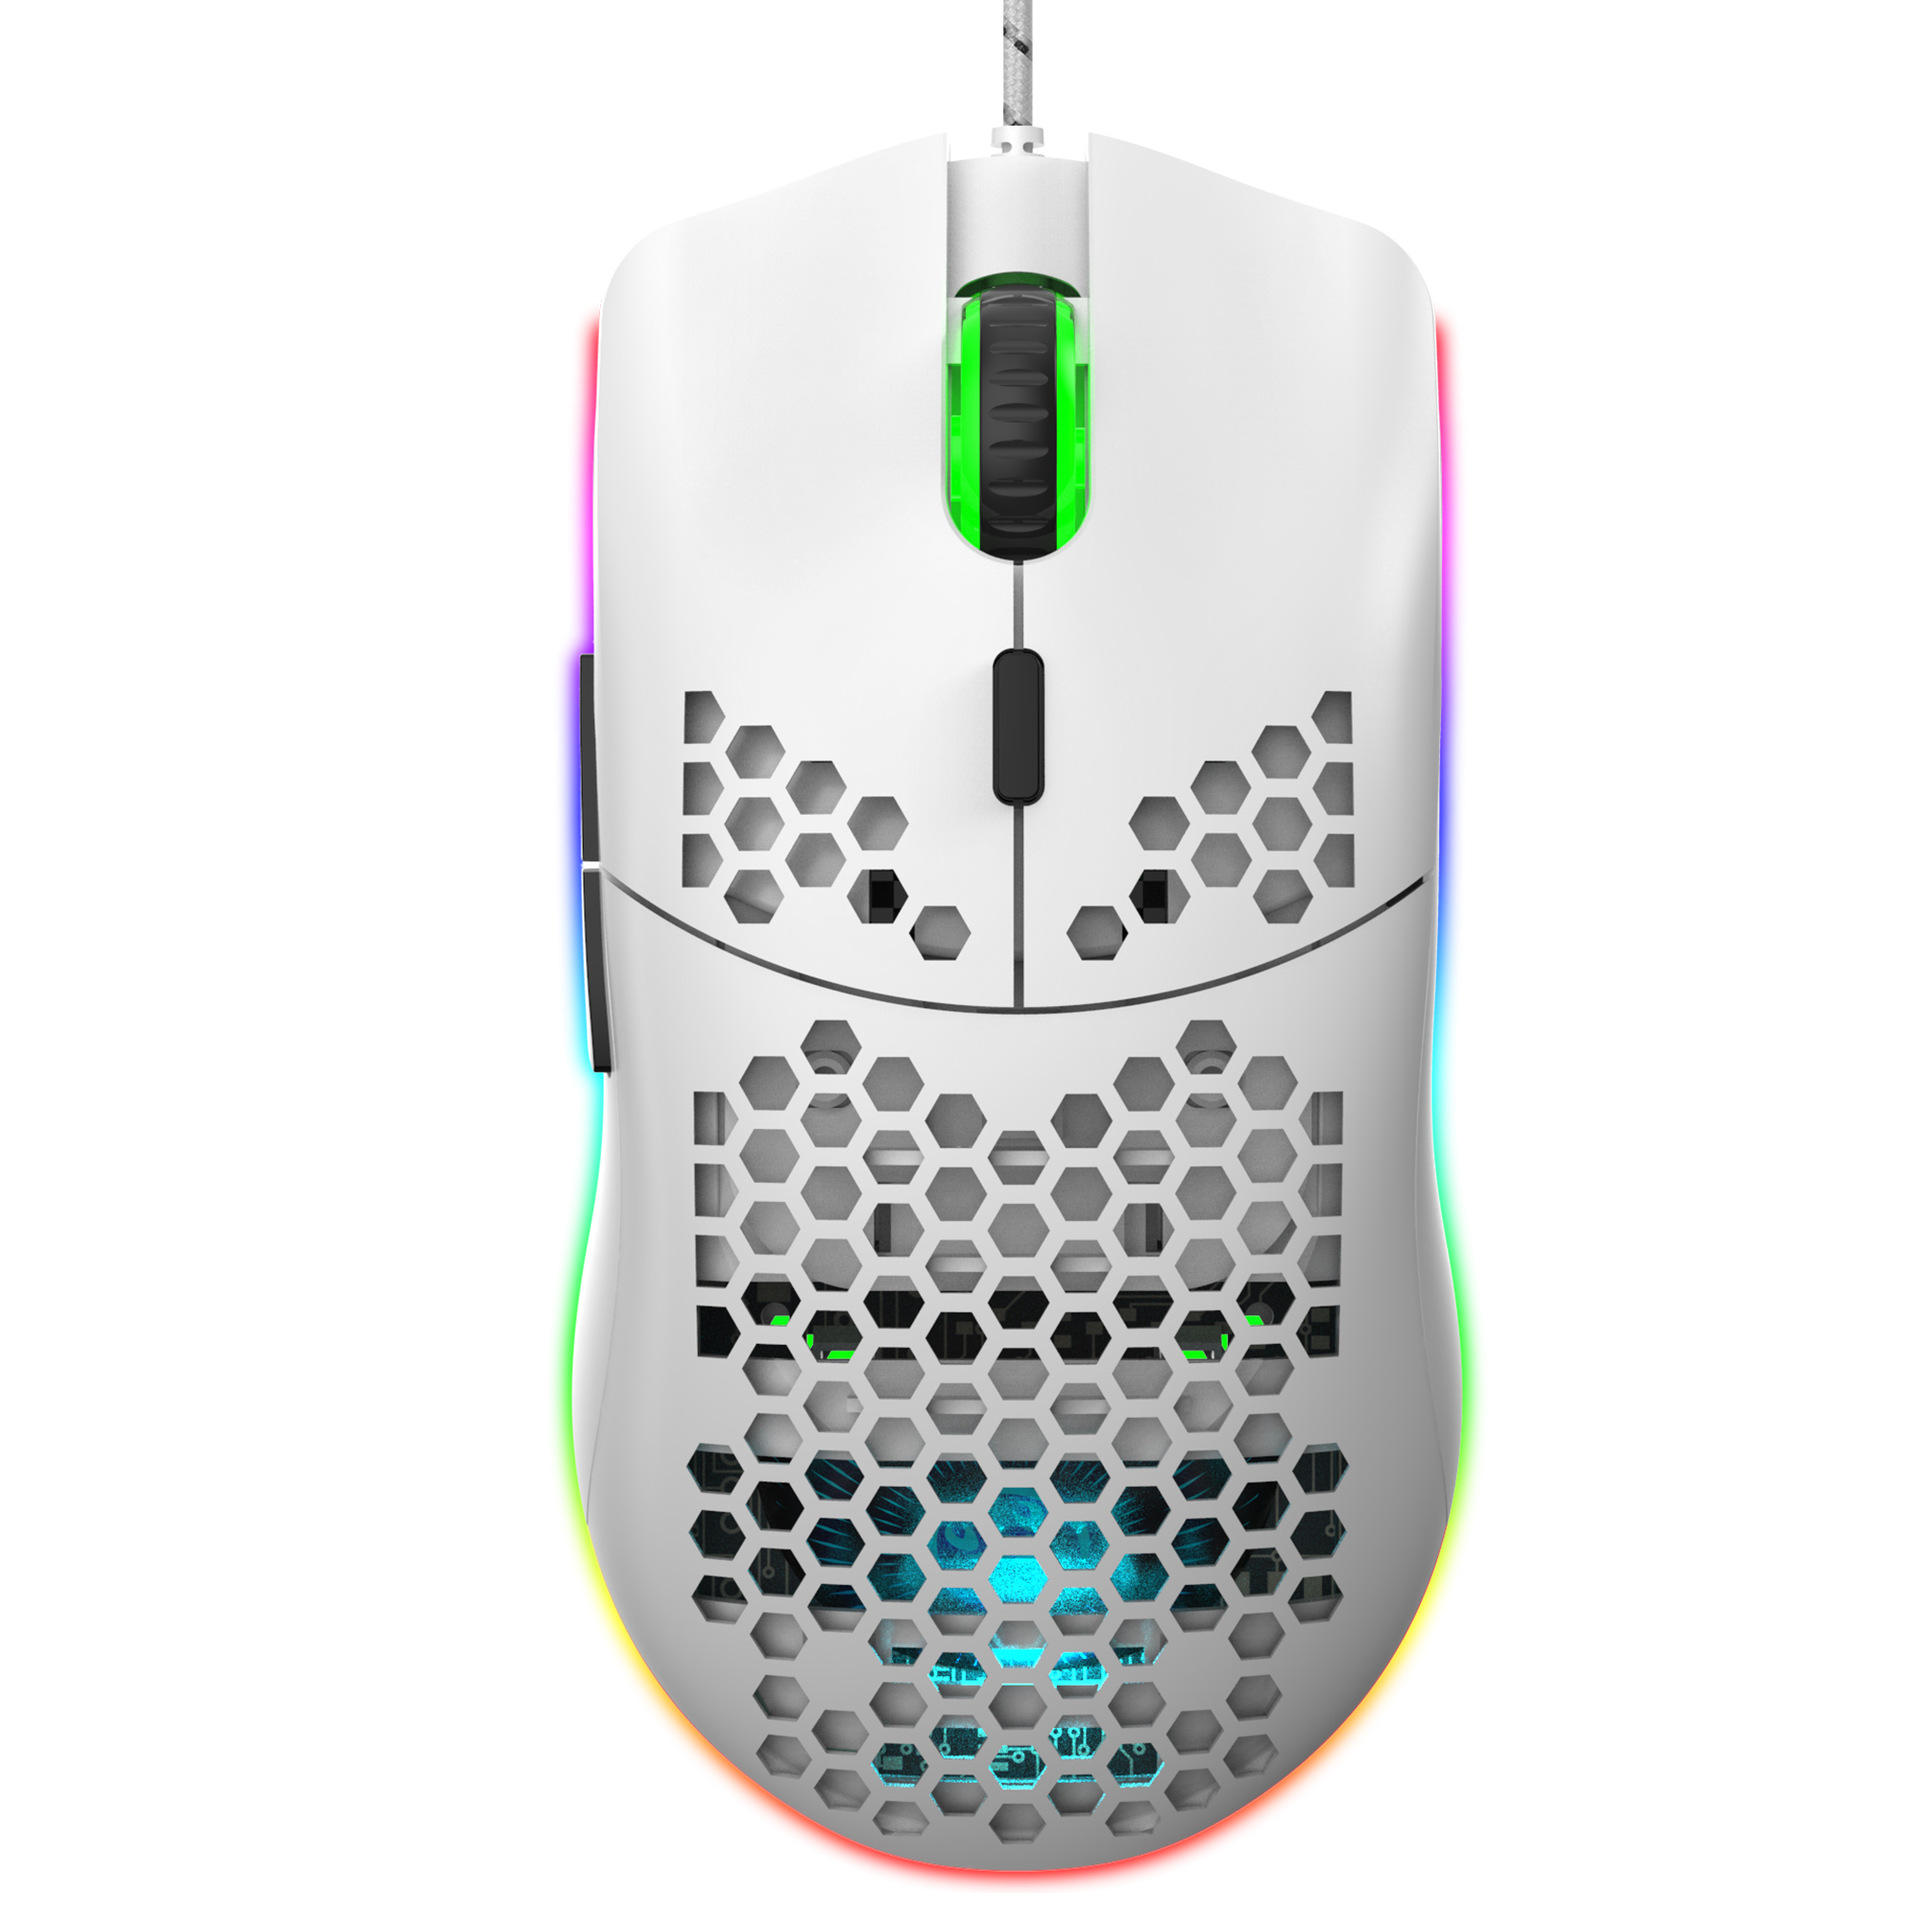 Dongdong Mouse RGB Luminous Macro Programming Gaming Mouse 6 Buttons Can Turn Off The Lights